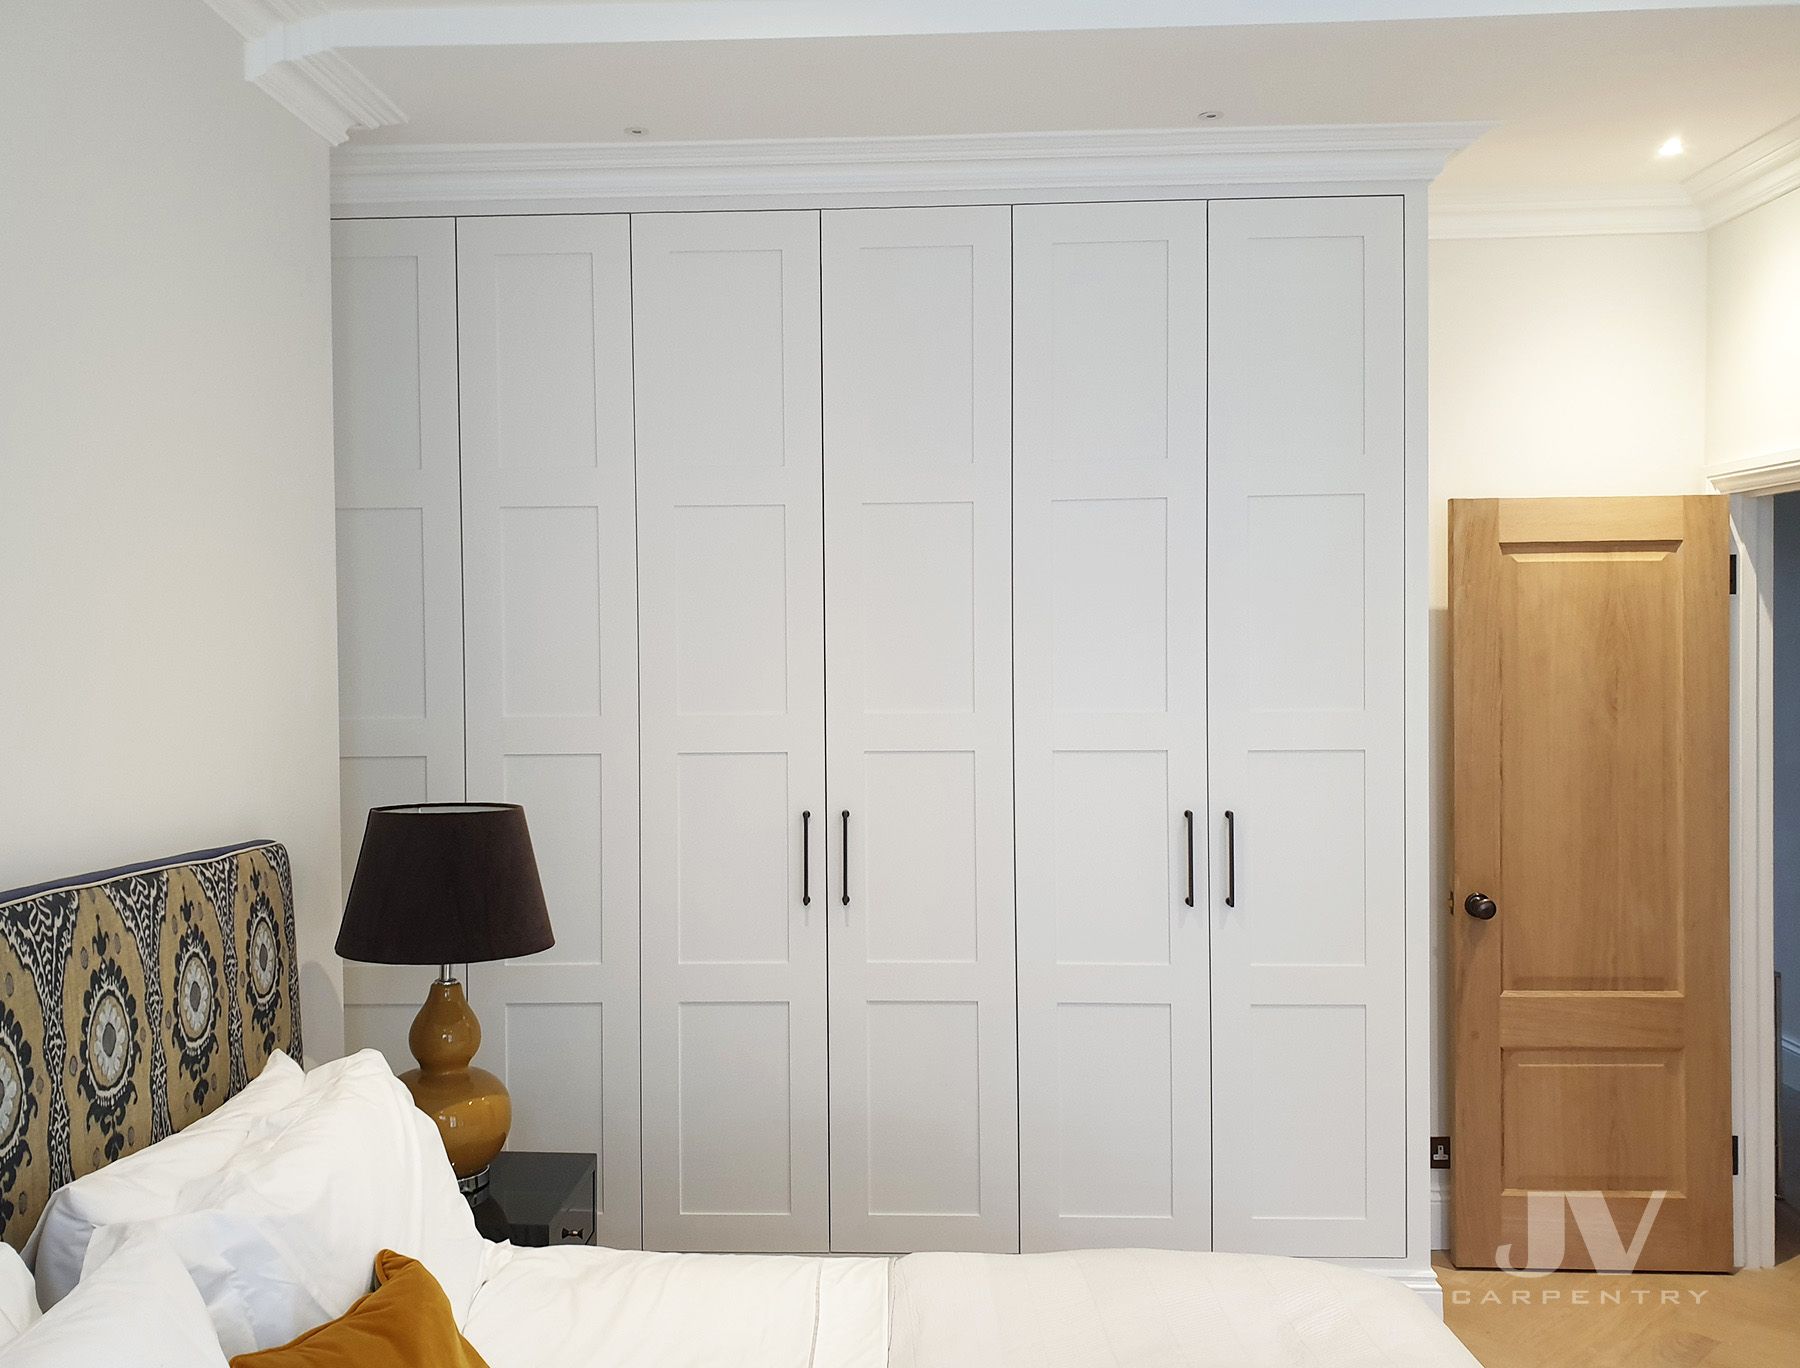 Fitted Wardrobes | Bespoke Bedroom Furniture | Jv Carpentry Intended For Built In Wardrobes (Photo 3 of 15)